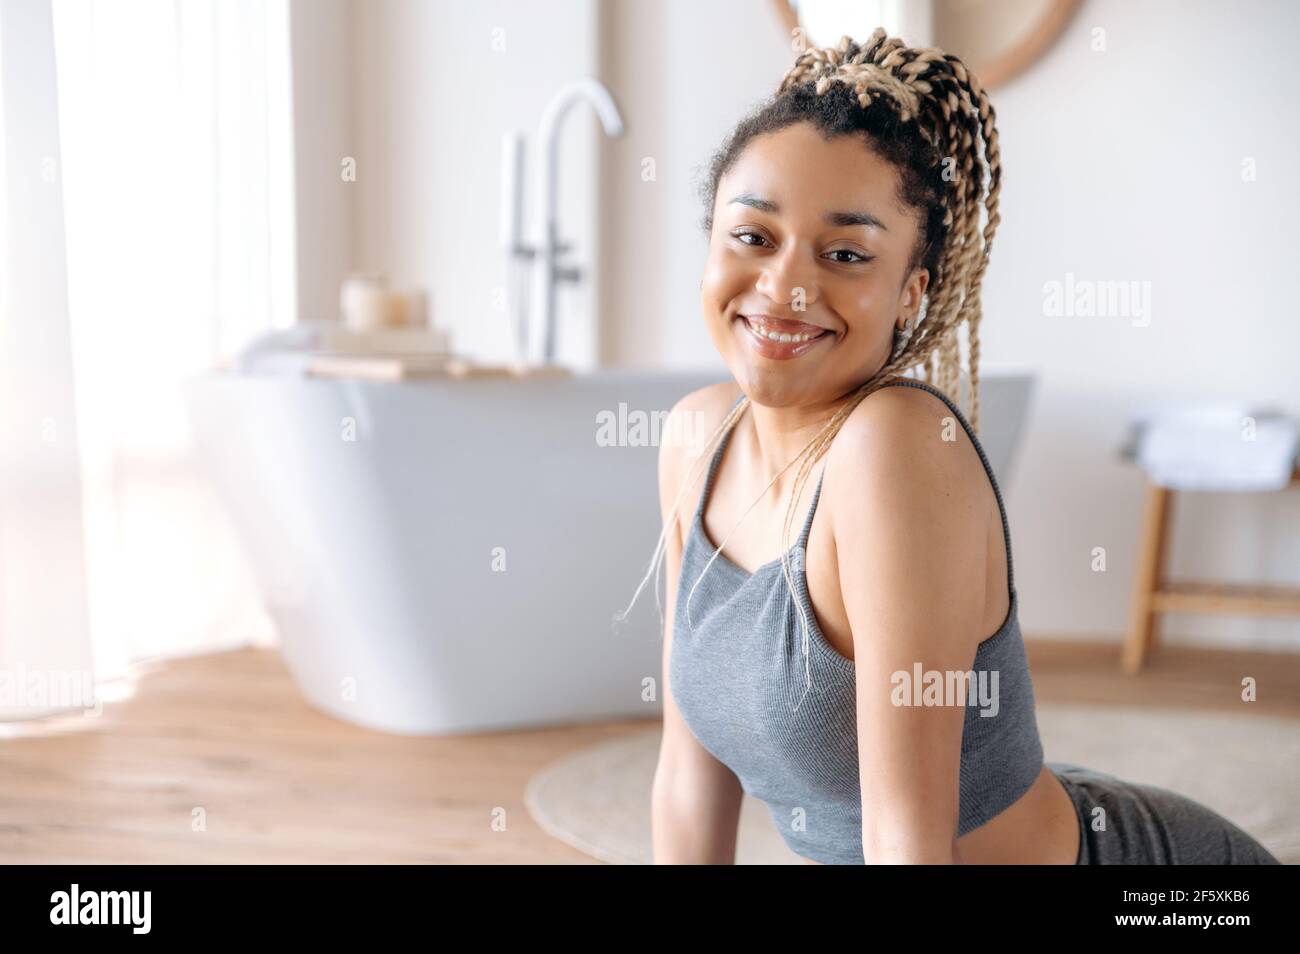 https://c8.alamy.com/comp/2F5XKB6/cute-athletic-african-american-brunette-girl-with-dreadlocks-in-sportswear-sitting-on-the-floor-on-a-fitness-mat-doing-a-warm-up-before-home-sport-workout-looking-at-the-camera-smiling-happily-2F5XKB6.jpg